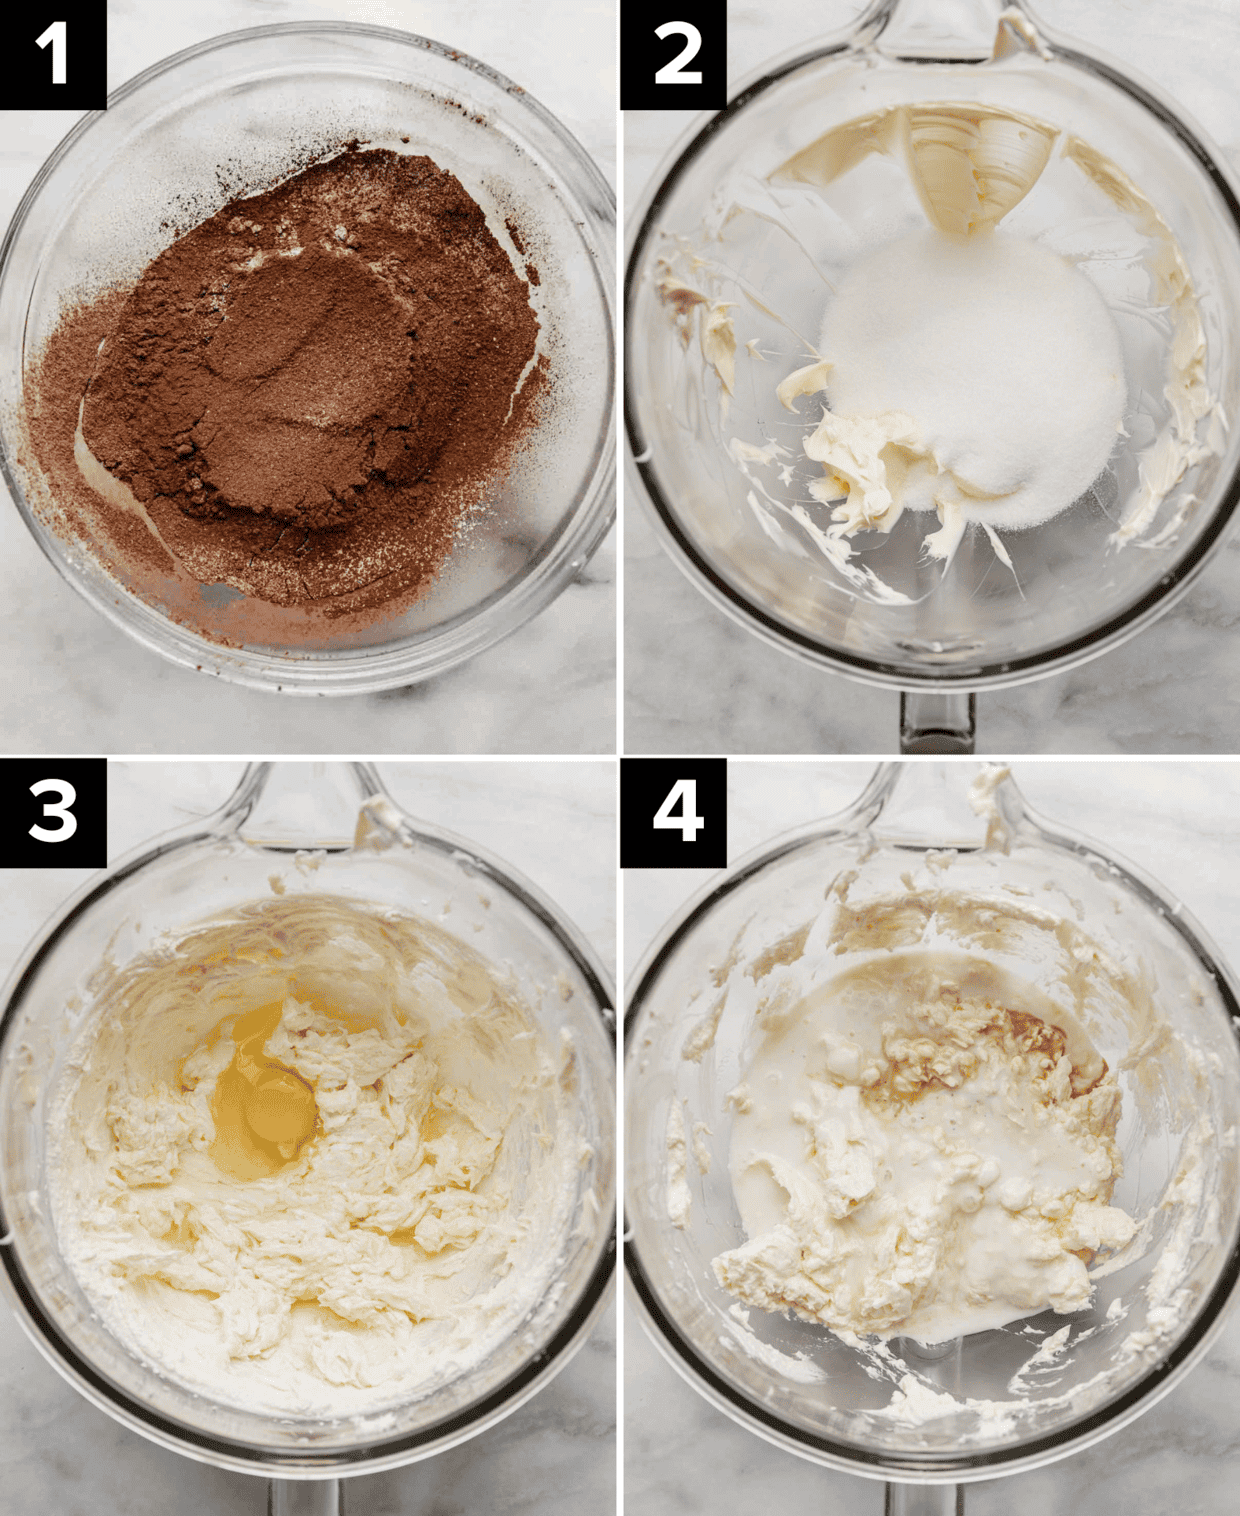 Four images showing the beginning making of the best Chocolate Pound Cake, each image is a glass bowl with varying ingredients, top left is flour and cocoa powder, top right is butter and sugar, bottom left has egg added to the batter, and bottom right has buttermilk and vanilla added.